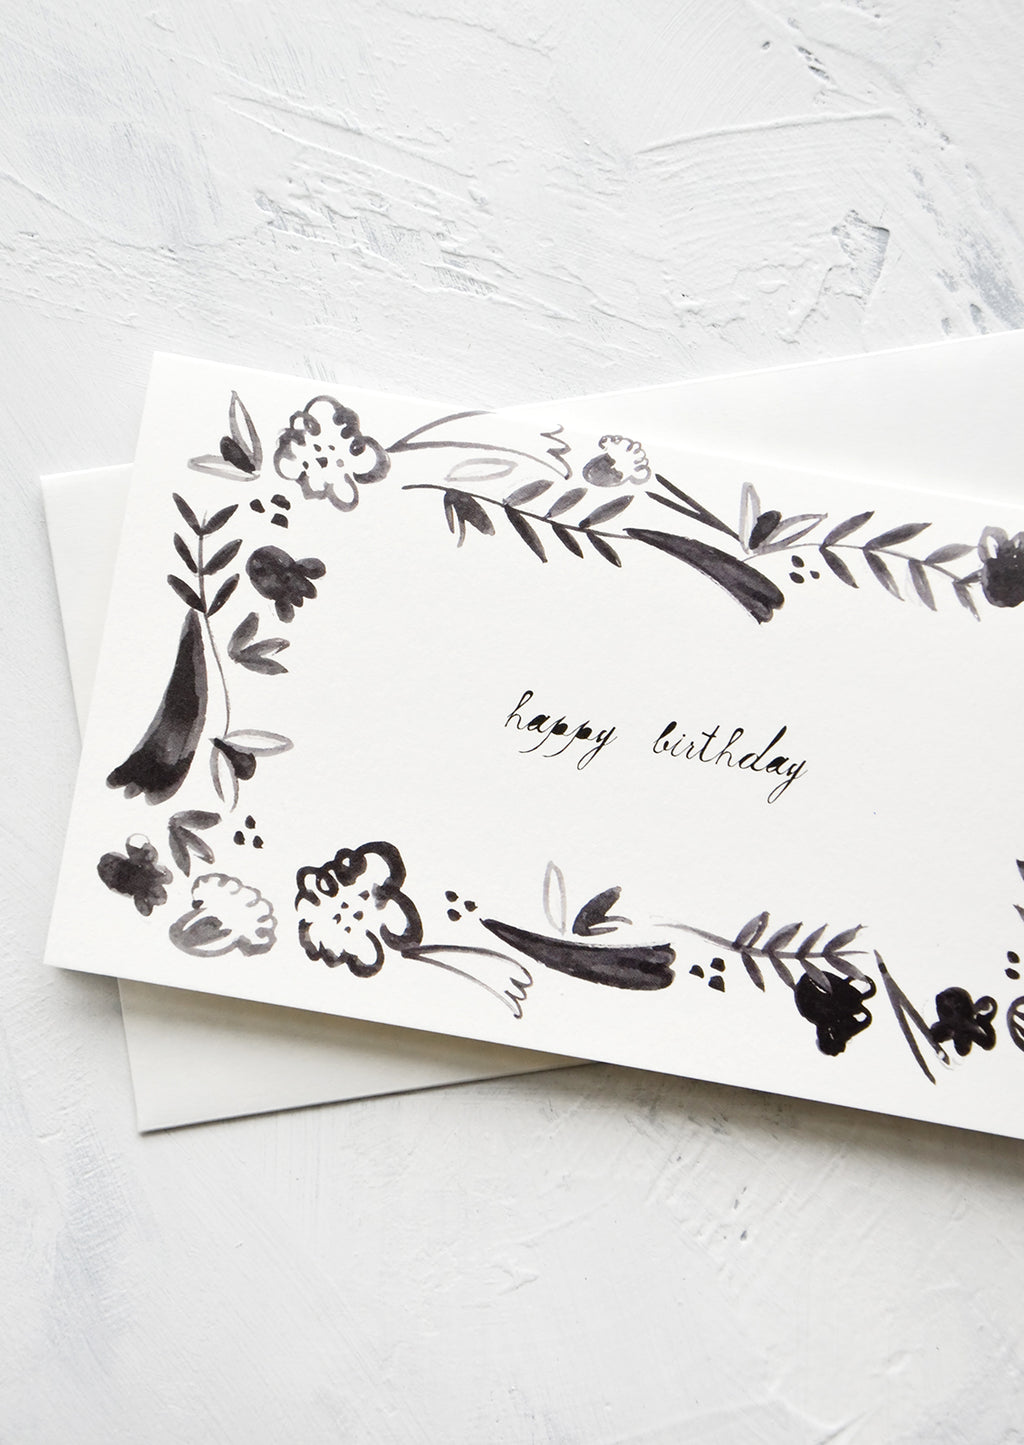 1: Black and white greeting card with floral frame around "happy birthday" script at middle